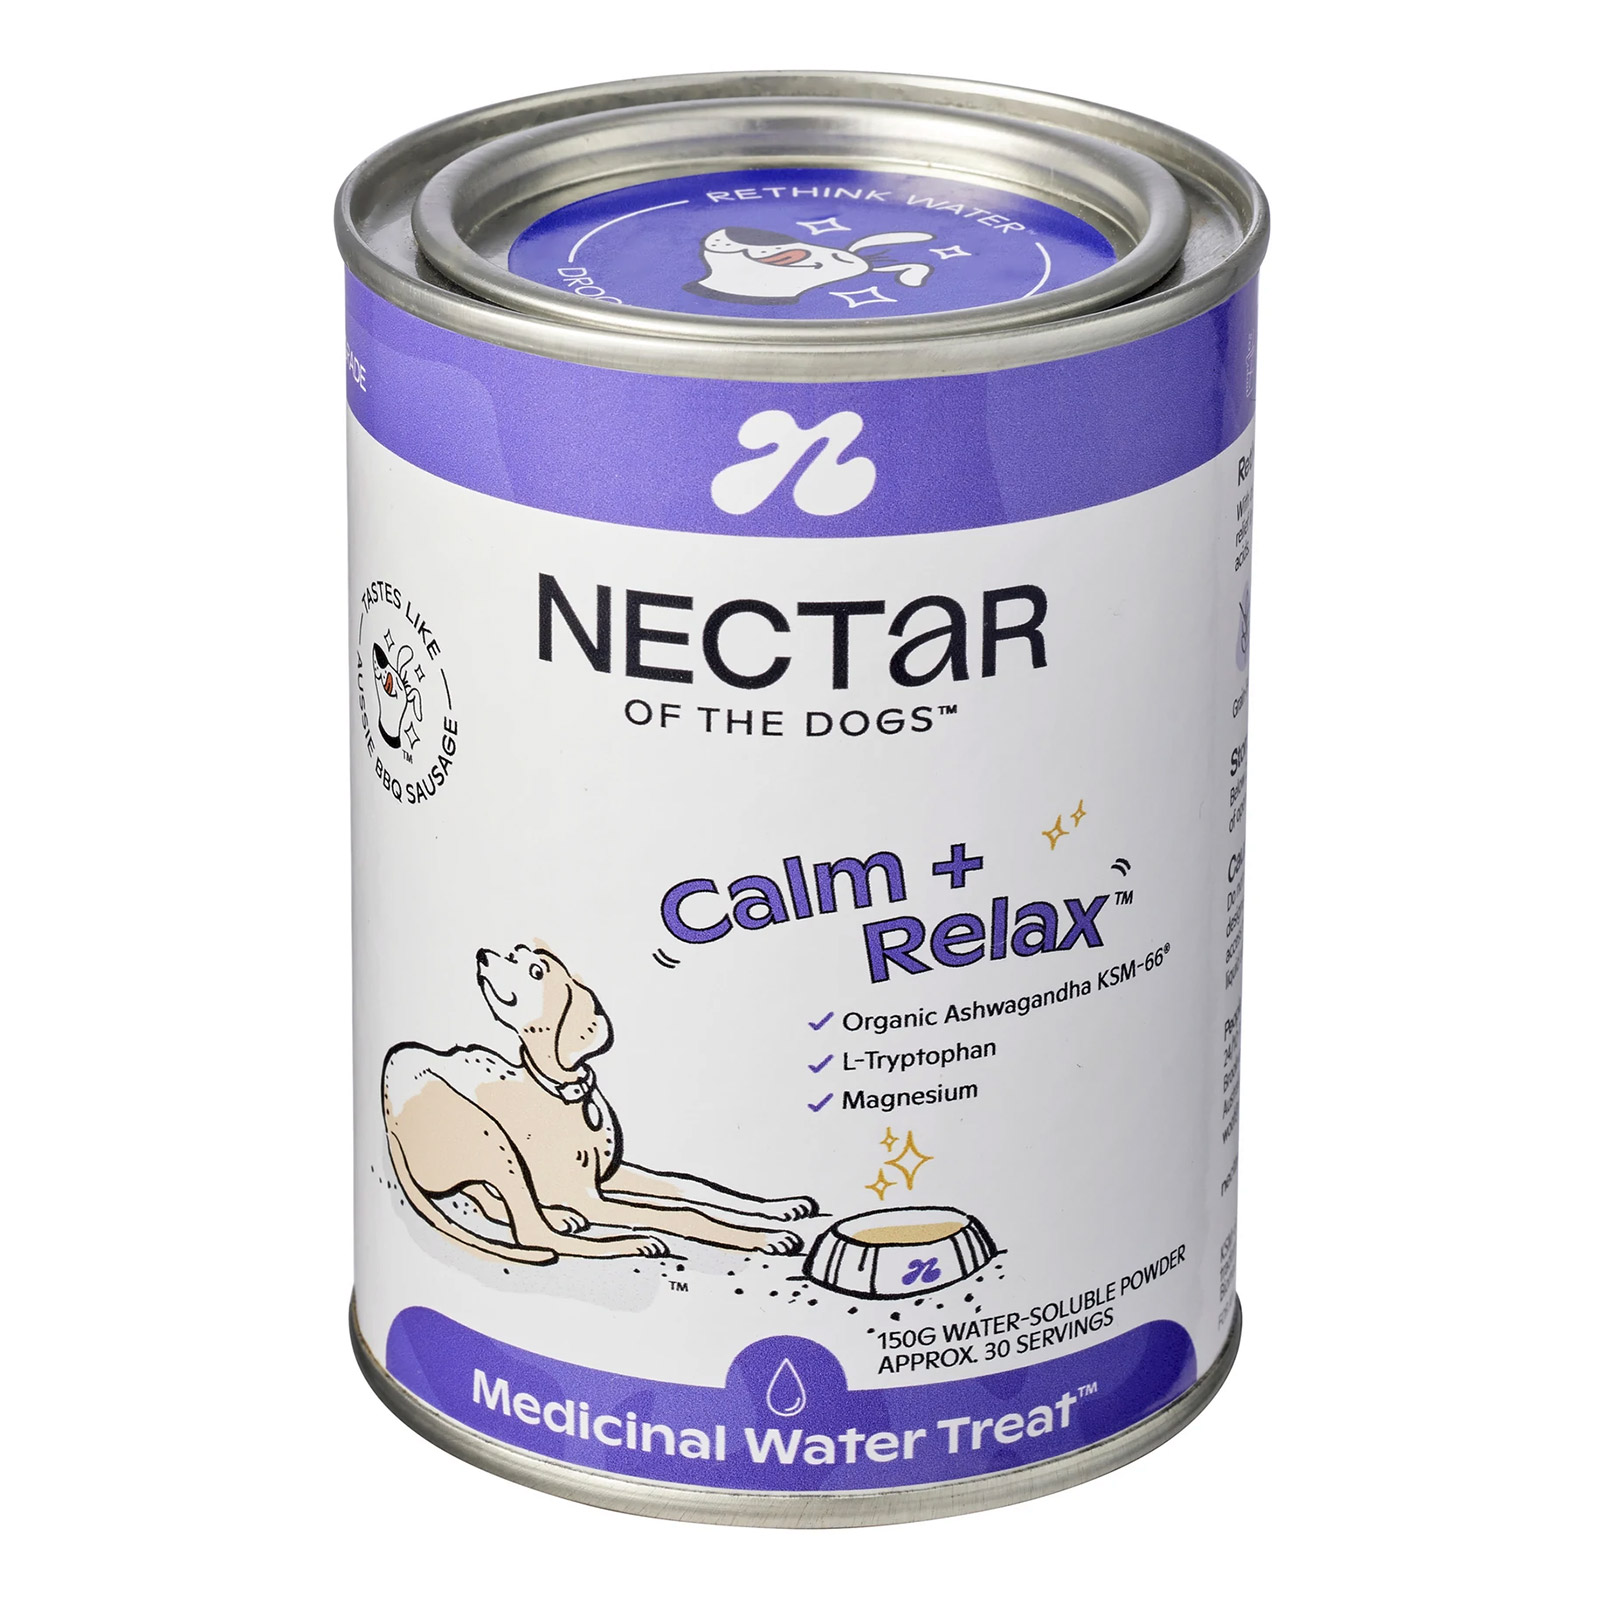 Nectar Calm & Relax Powder for Dogs